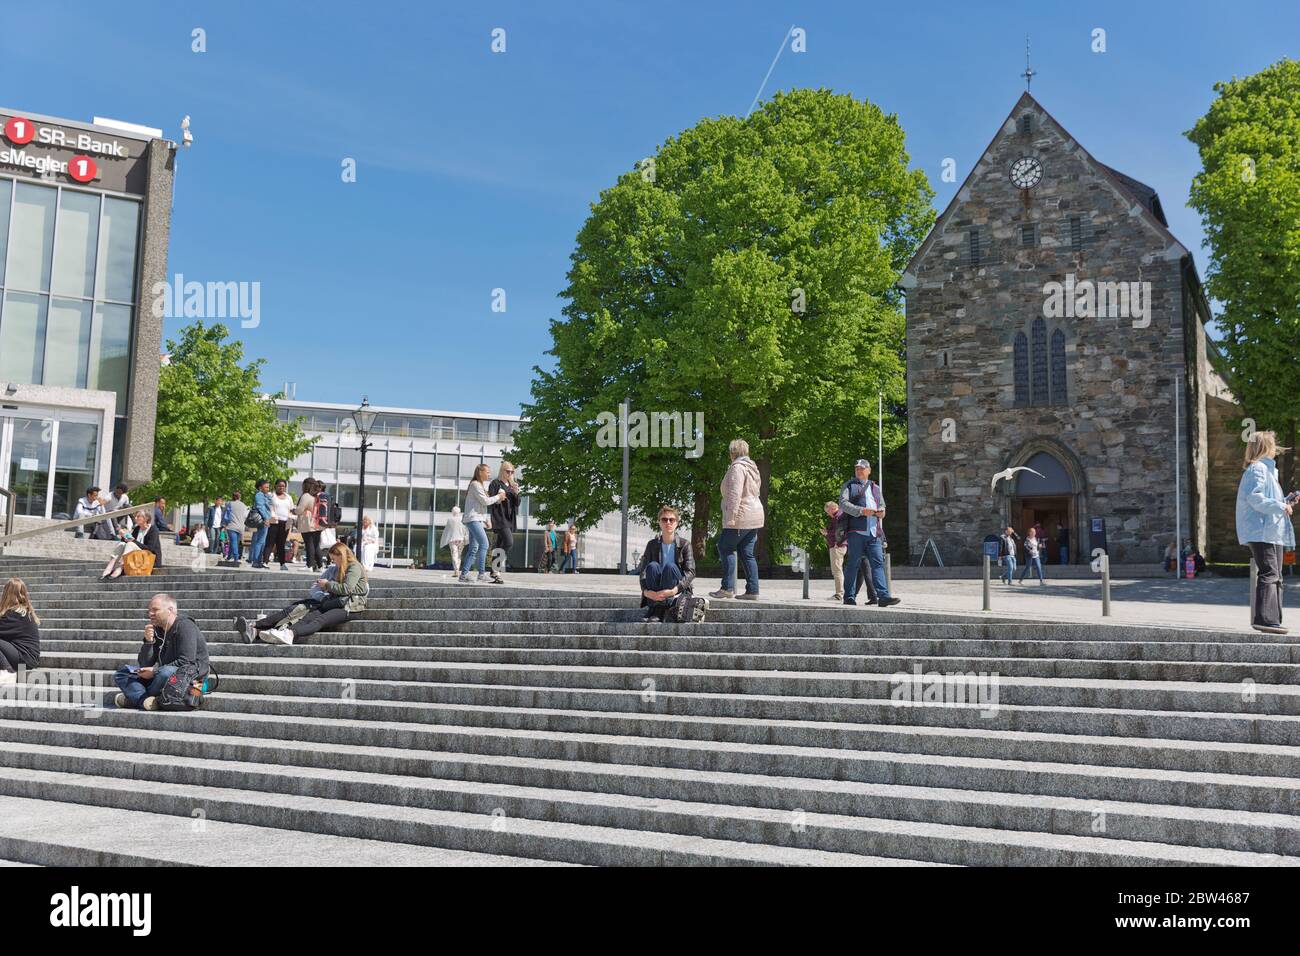 STAVANGER, NORWAY - JUNE 01, 2017: People relaxing and sitting on stairs in front of Stavanger Cathedral in Stavanger Norway. Stock Photo